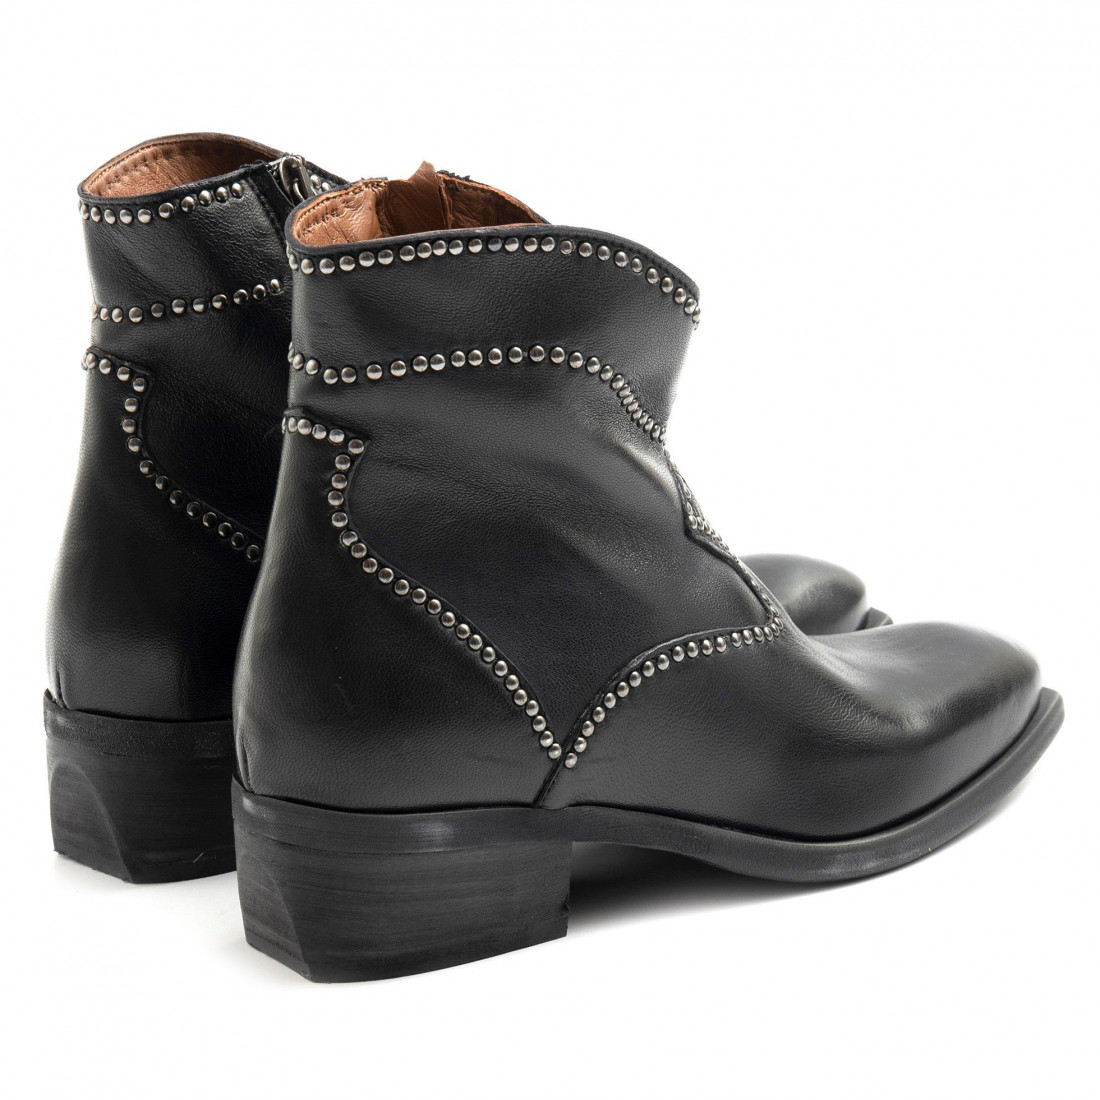 Zoe women's tex ankle boot in black leather with studs